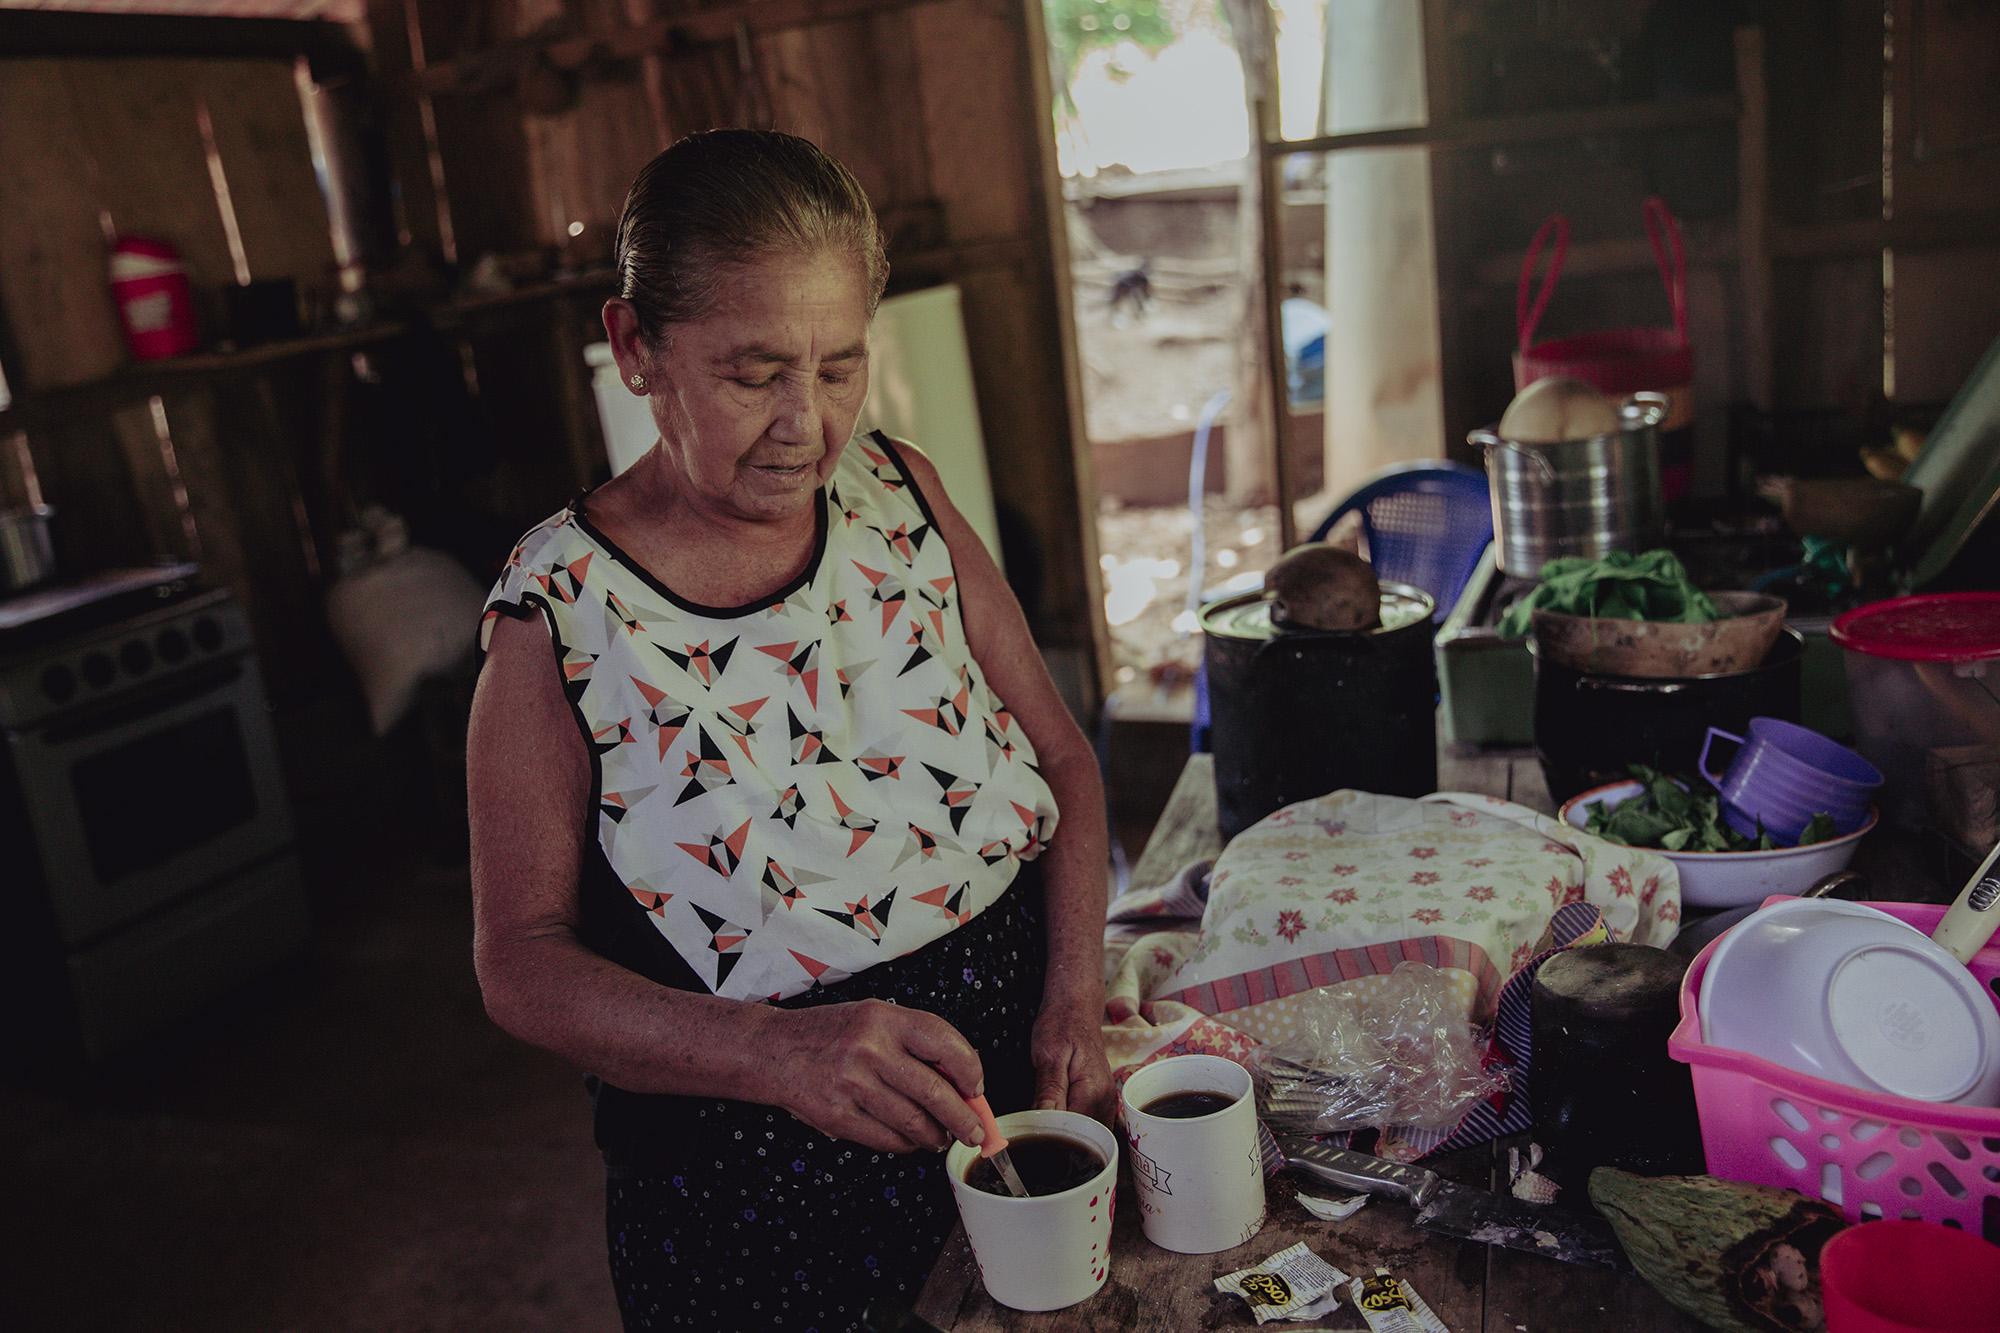 María Alvarenga lives in Las Delicias and cooks with water that she collects from a nearby spring. She purifies the water using an artisanal filter made by local residents. Photo: Carlos Barrera/El Faro.